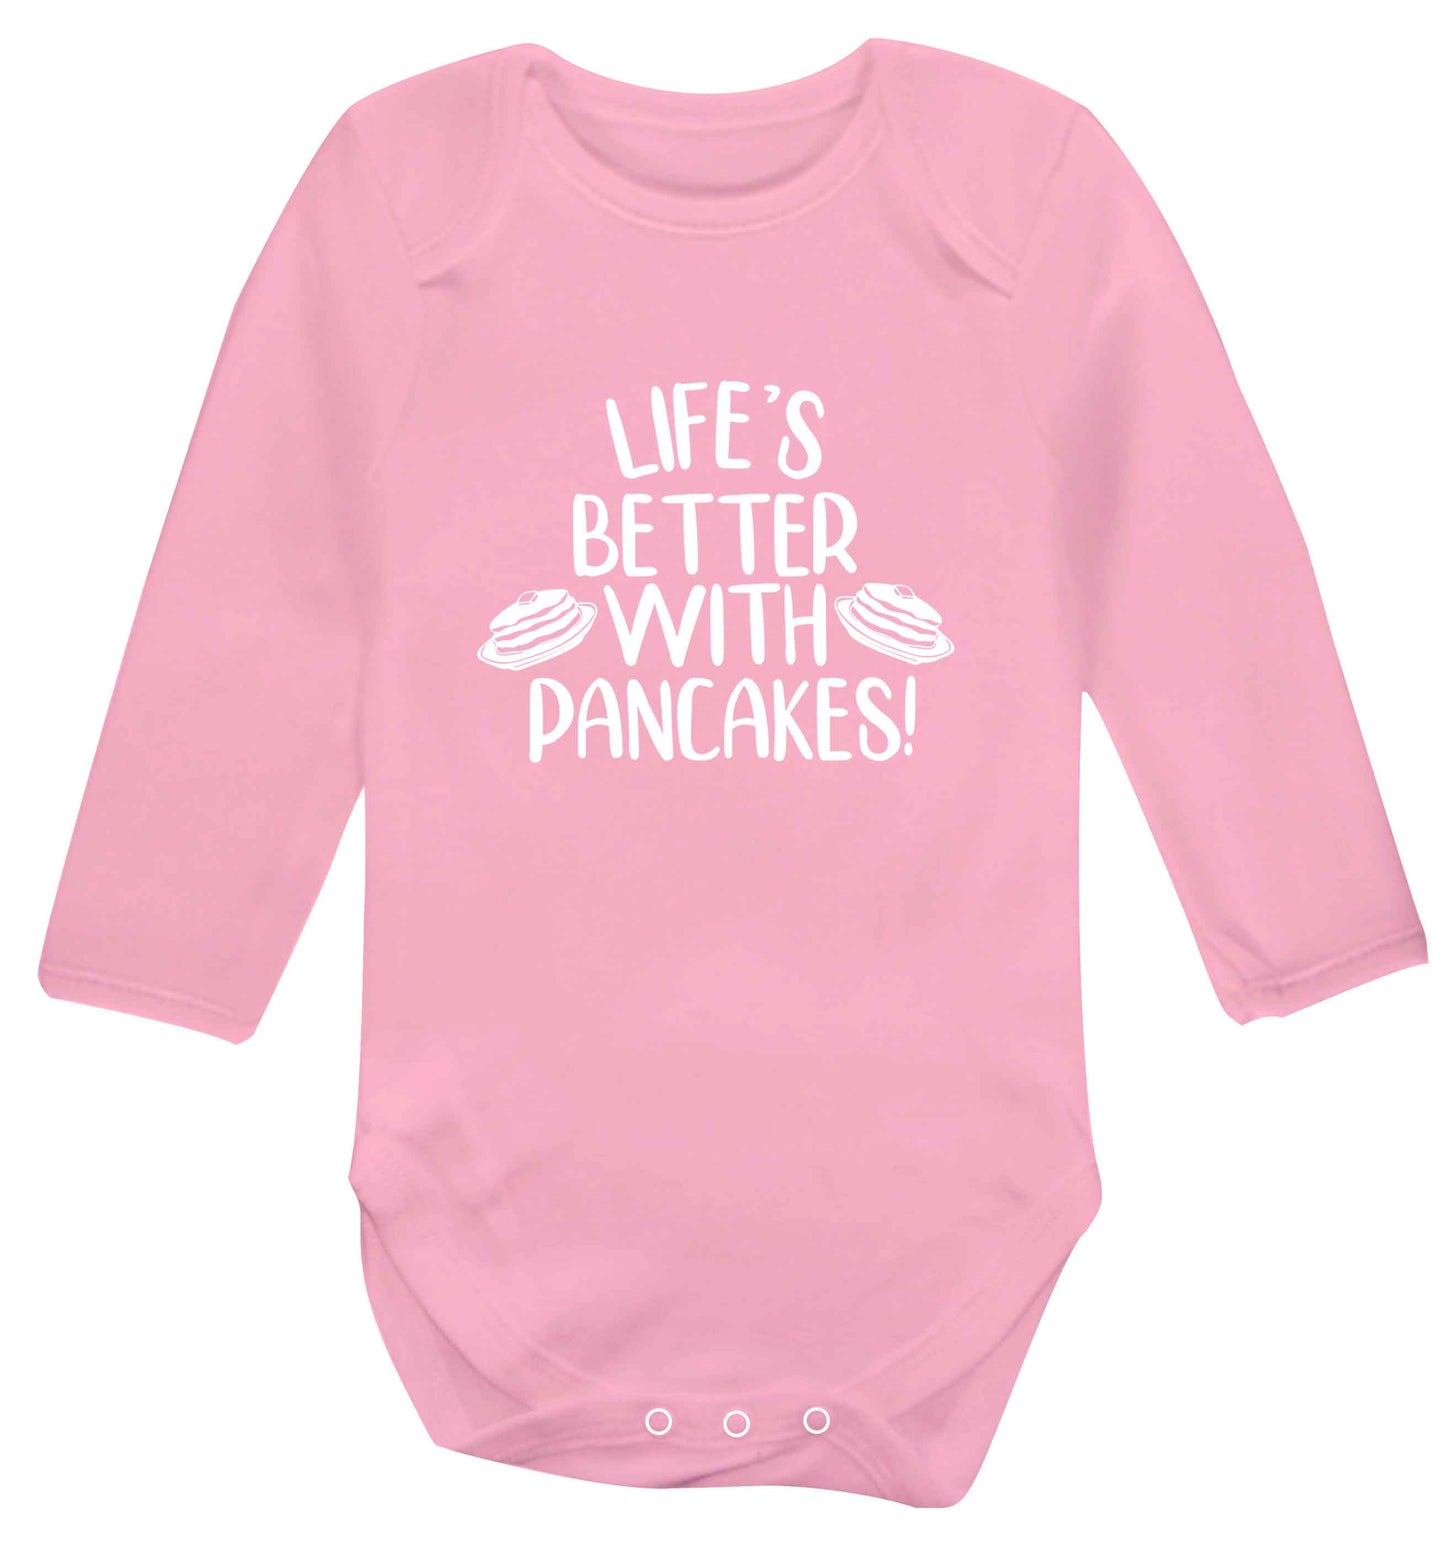 Life's better with pancakes baby vest long sleeved pale pink 6-12 months